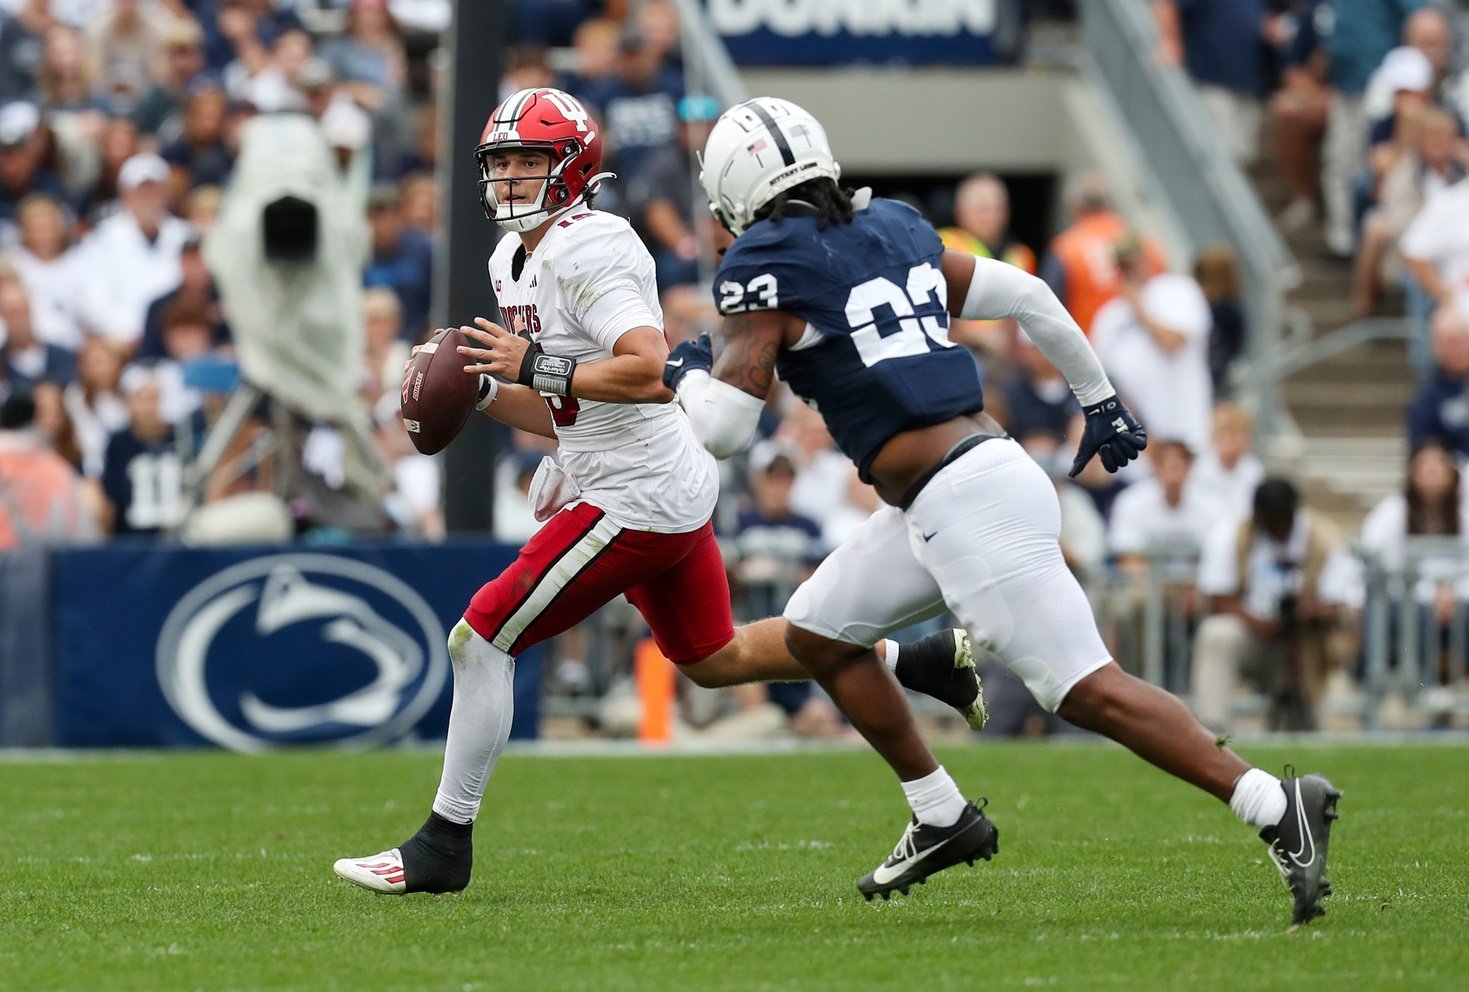 Indiana Hoosiers quarterback Brendan Sorsby (15) runs with the ball under pressure from Penn State Nittany Lions linebacker Curtis Jacobs (23) during the fourth quarter at Beaver Stadium.